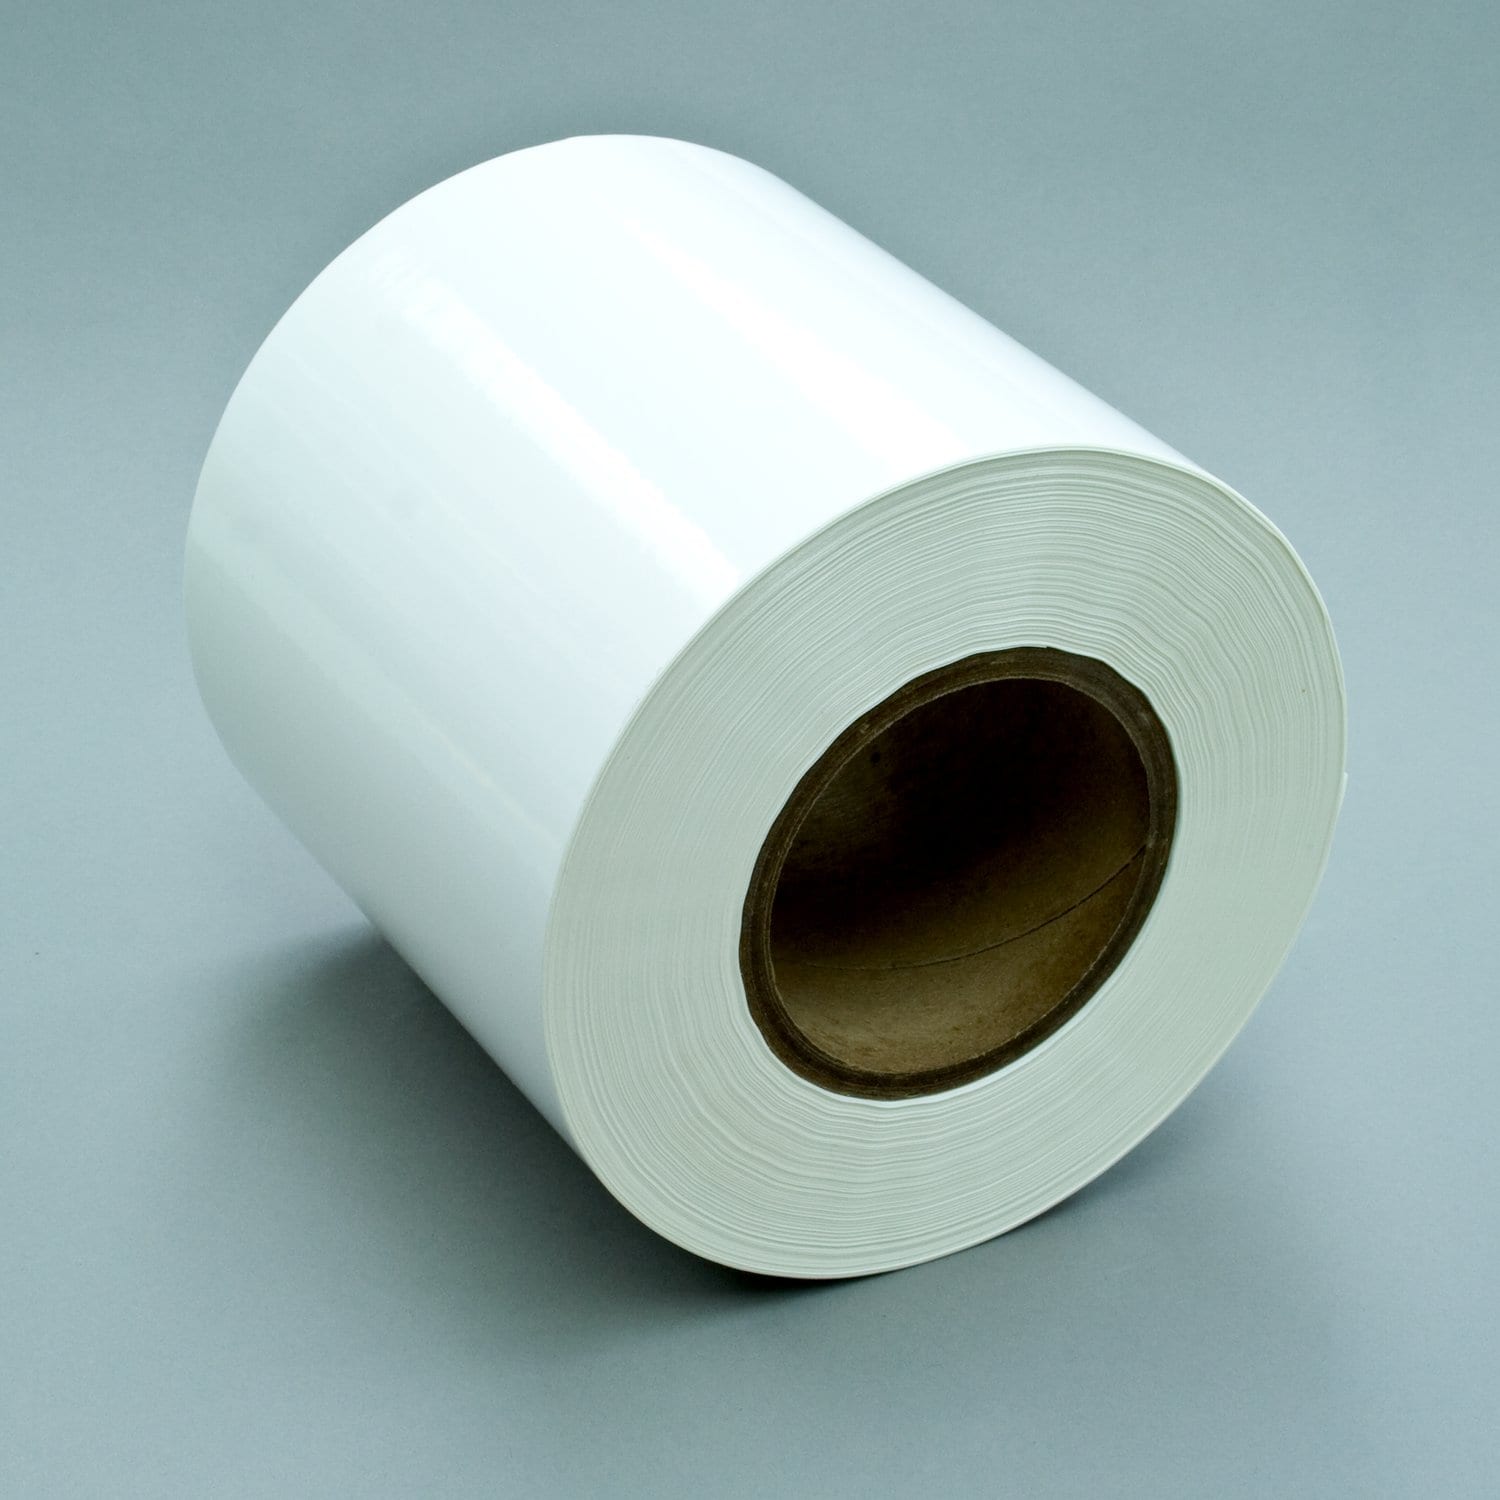 7000050168 - 3M Sheet and Screen Label Material 7908, White Polyester Gloss, 20 in x
27 in, 100 Sheets/Case